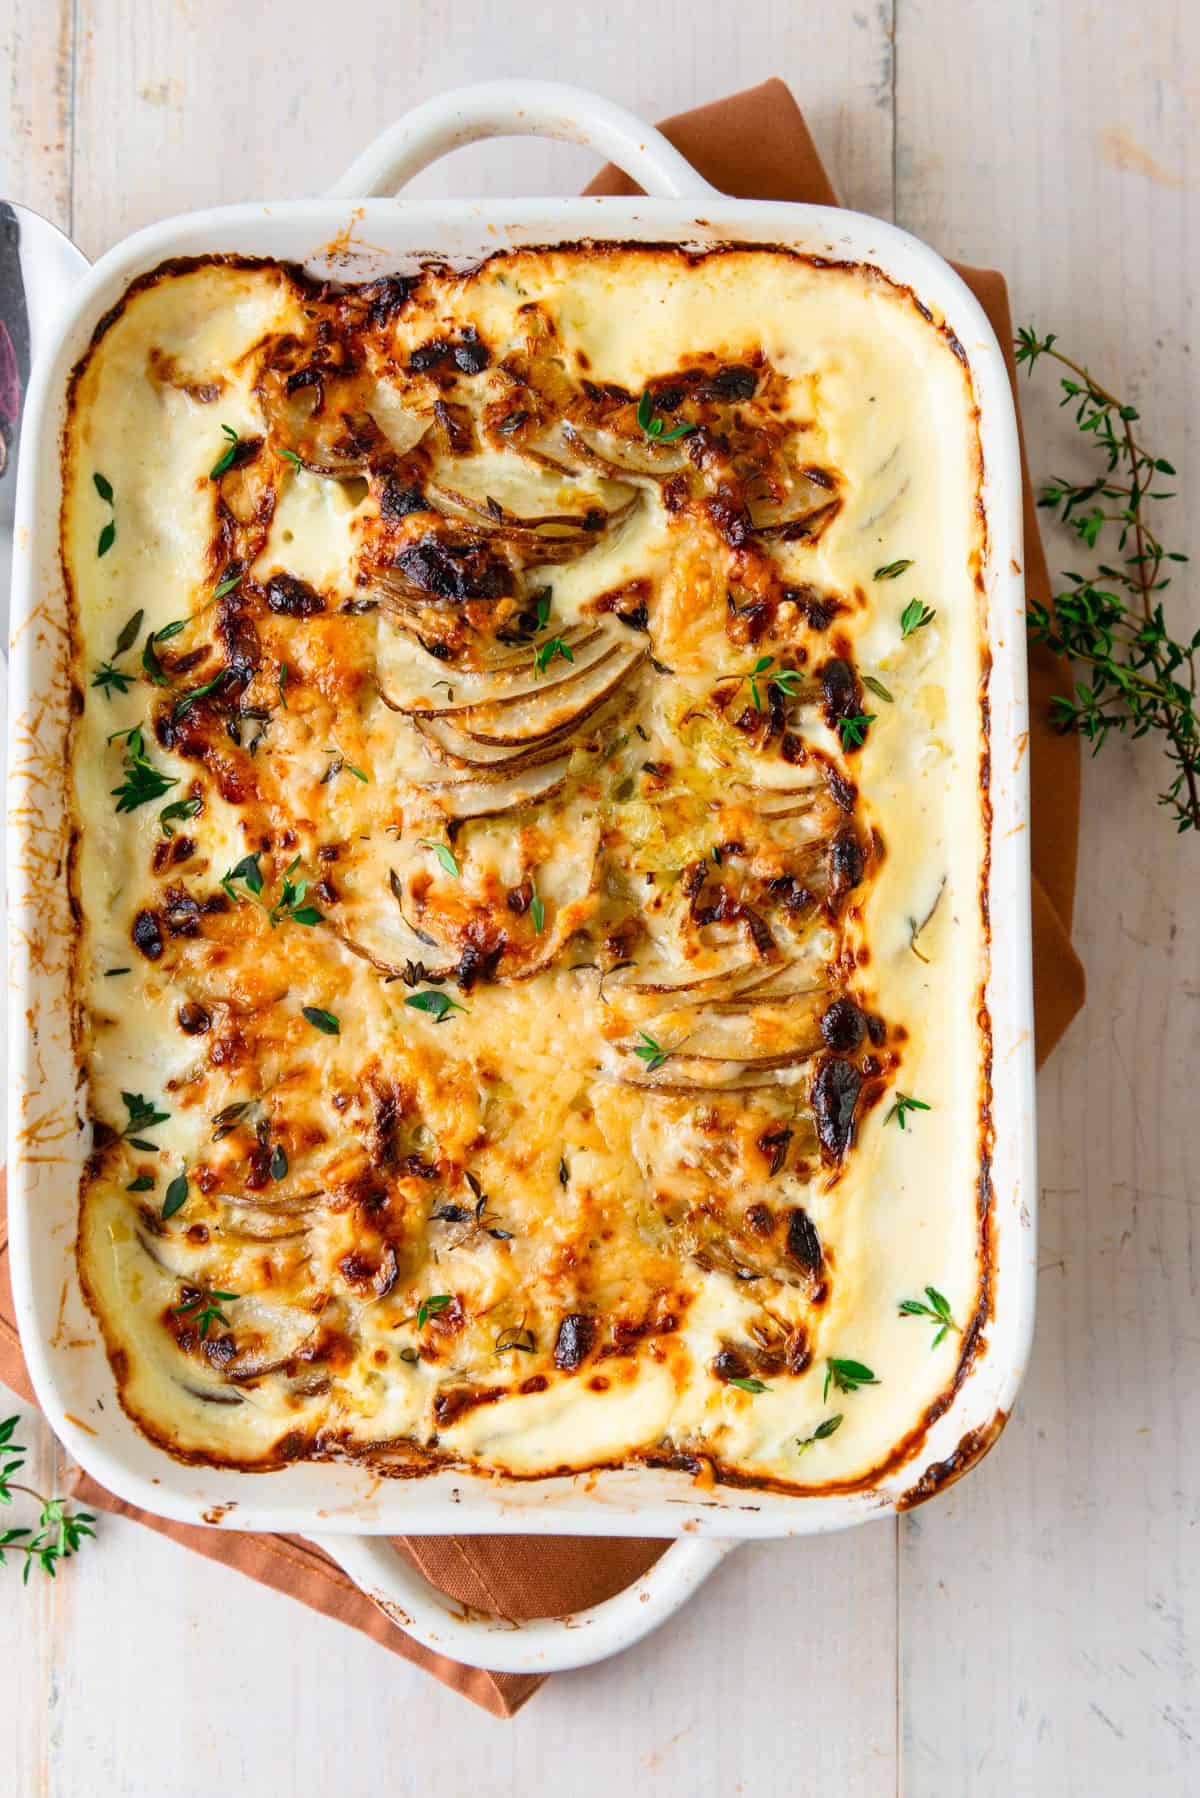 Leek and potato gratin with thyme and Parmesan cheese.